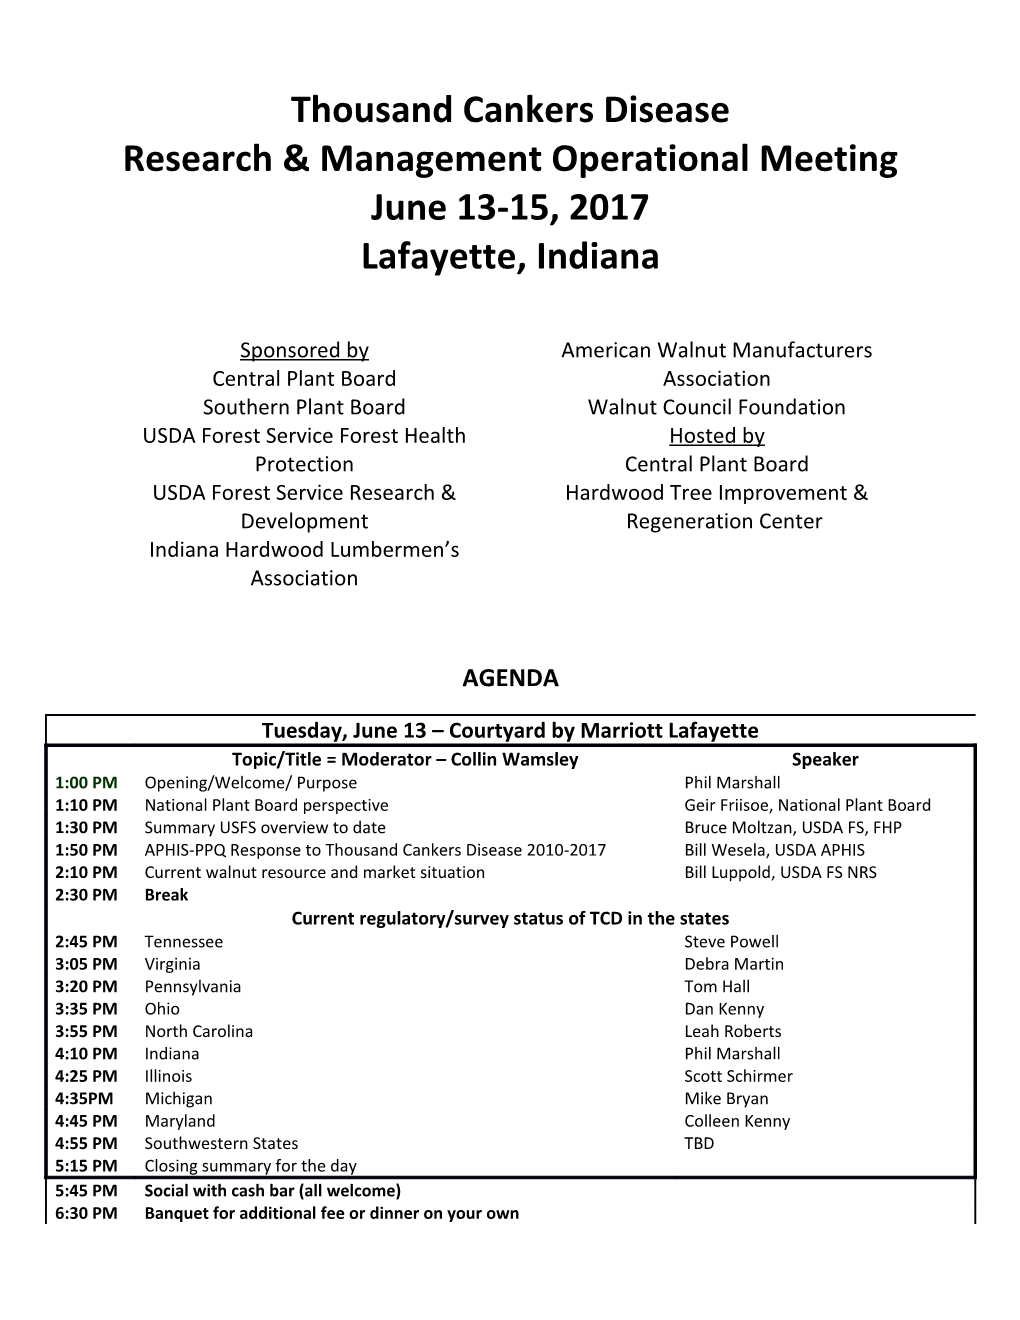 Research & Management Operational Meeting